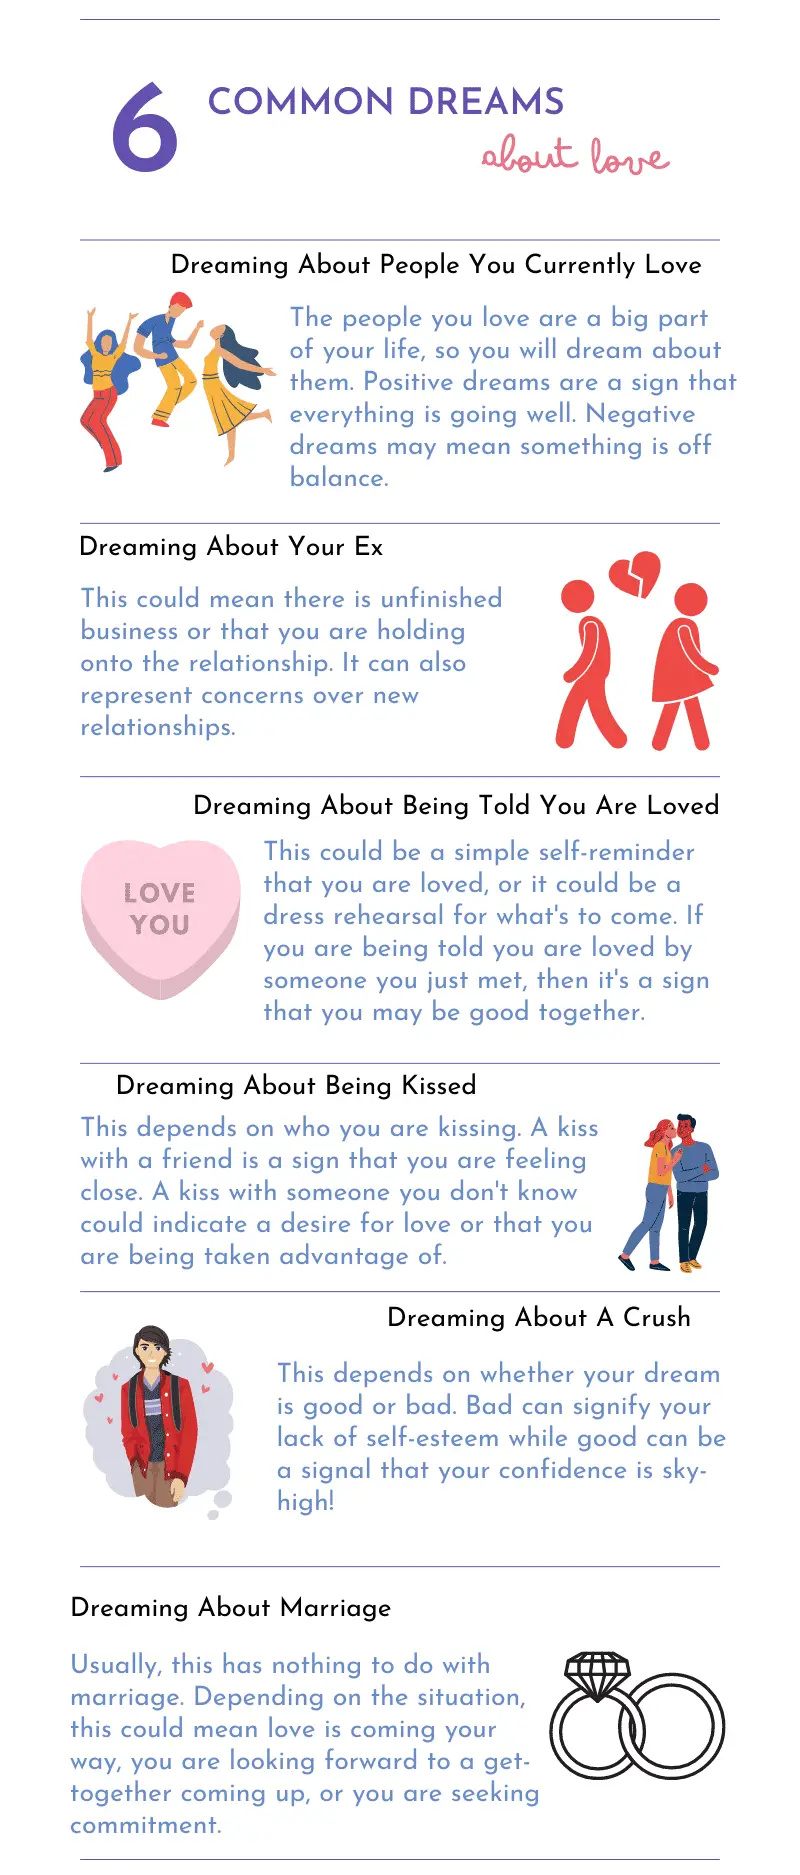 4. Relationship With Dreams